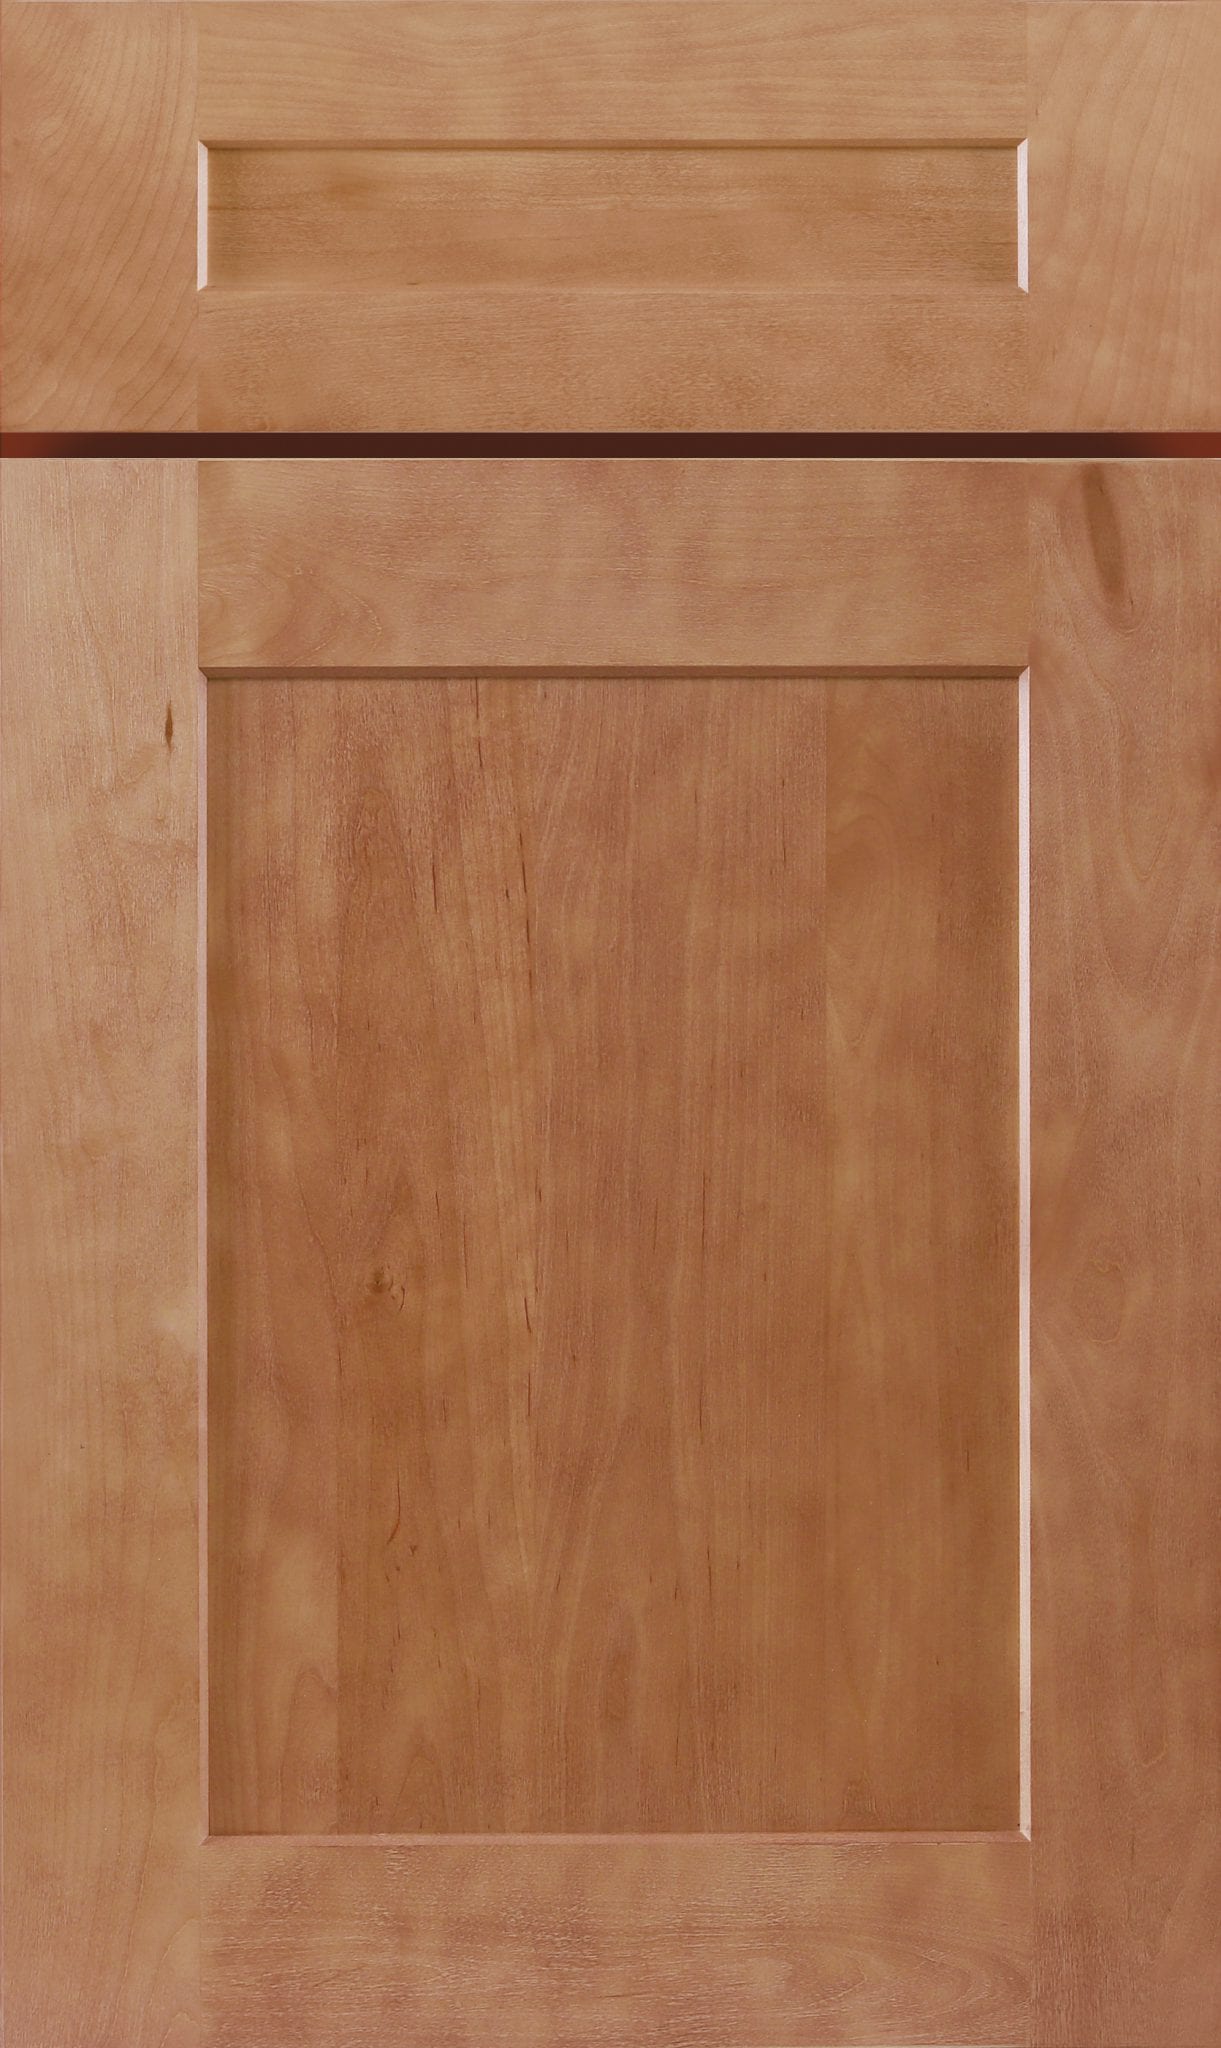 S2 Almond Maple Cabinetry